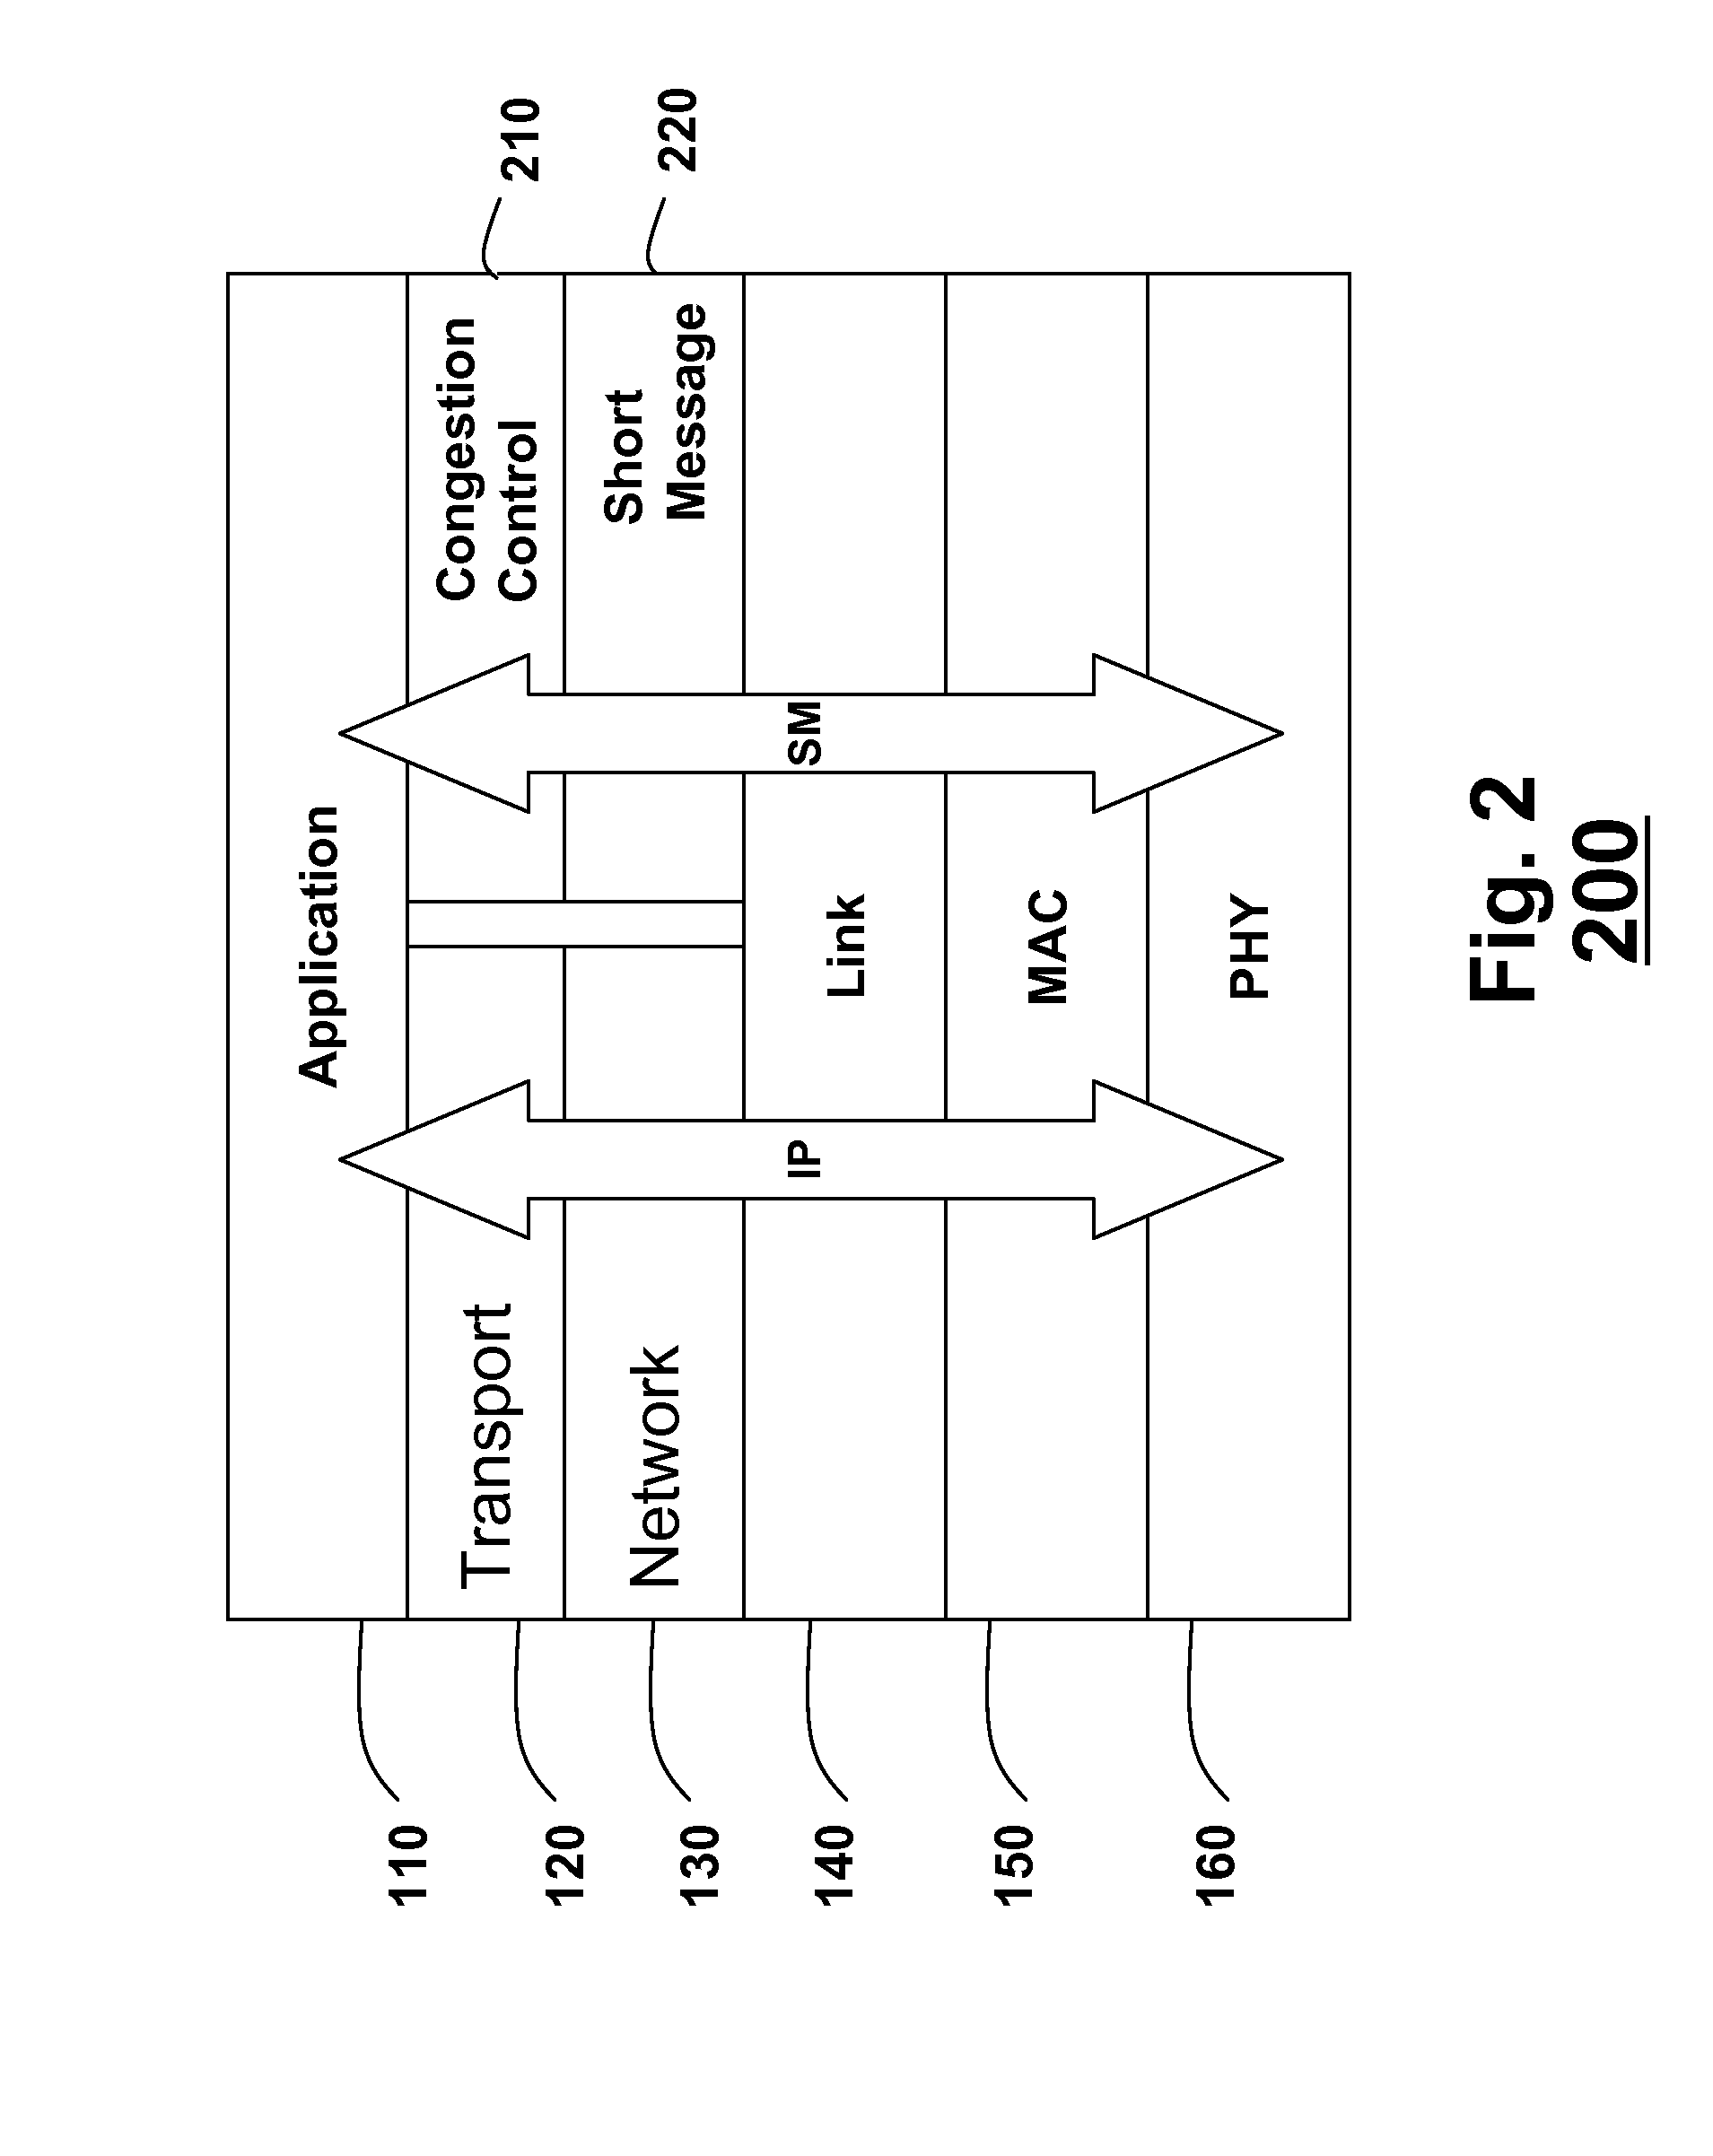 Method and protocol for congestion control in a vehicular network